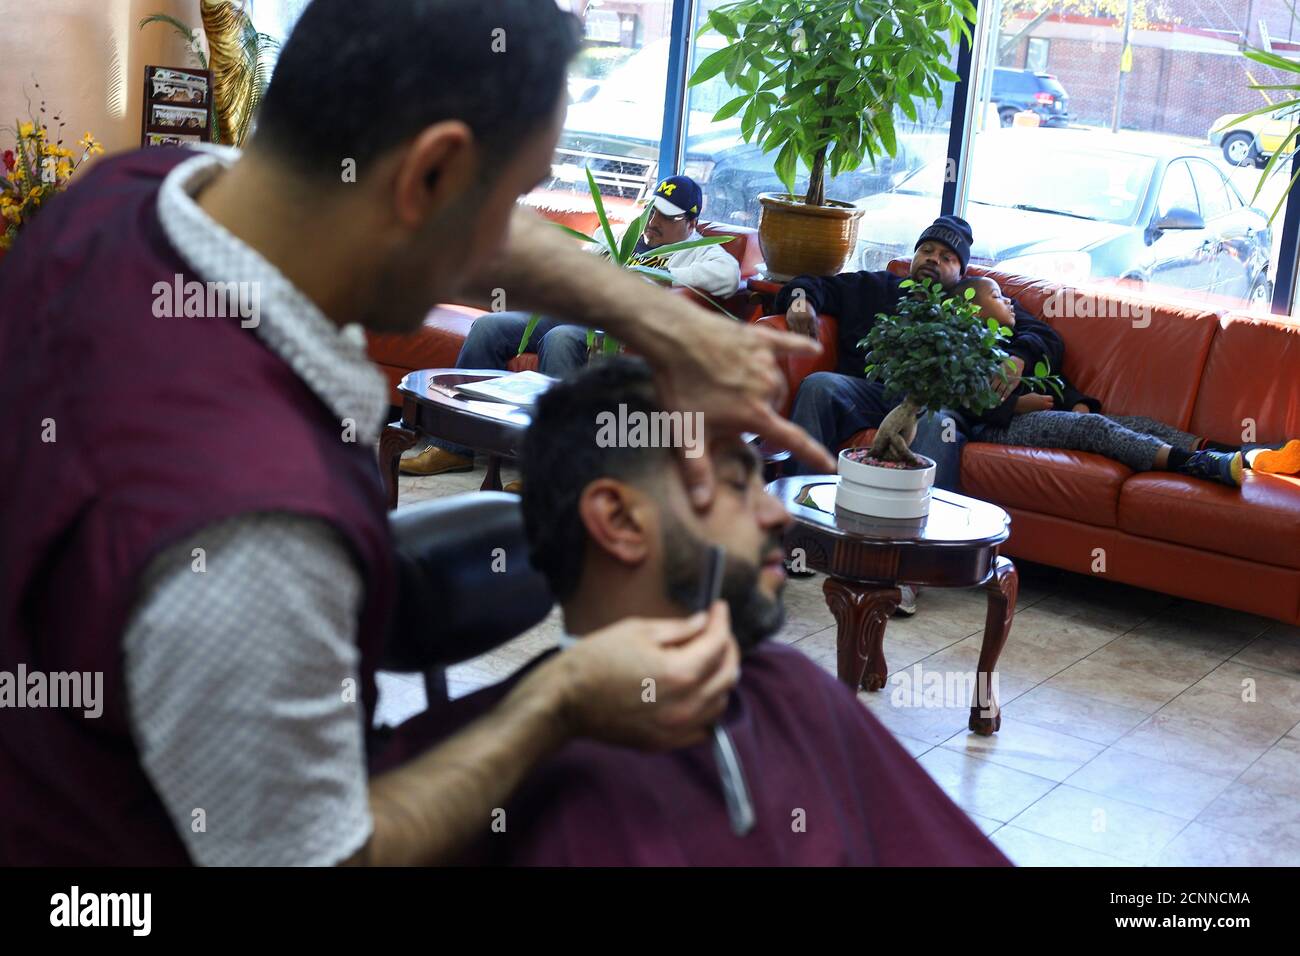 A father and son rest while awaiting their turn at Sinbad's Hair Salon in  Dearborn, Michigan, ., on November 12, 2016. REUTERS/Brittany Greeson  Stock Photo - Alamy